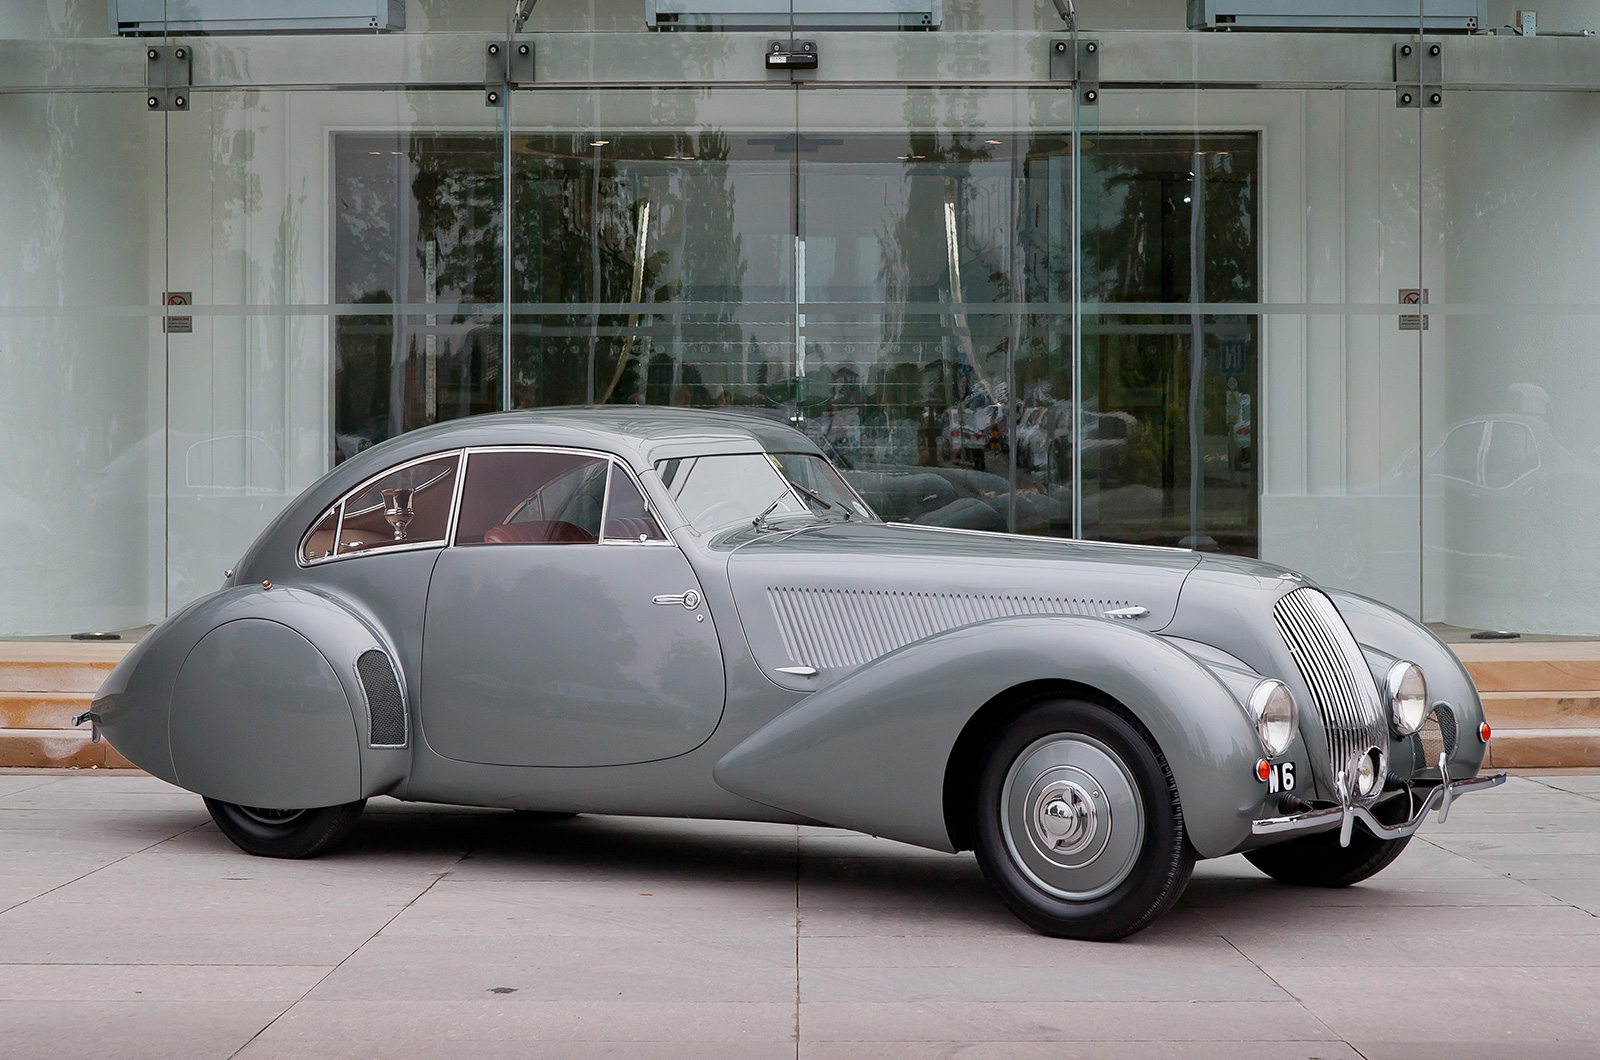 <p>In 1938, <strong>André Embiricos</strong>, a wealthy Greek racing driver living in Paris, commissioned a Bentley <strong>4 1/4-Litre </strong>with a sleek, aerodynamic body made from Duralumin, a lightweight aluminum alloy. This grand tourer was fast (it hit <strong>114mph </strong>over an hour at Brooklands) while also being civilized enough to despatch continental jaunts with ease.</p><p>This model was of great long term consequence for the company as both its design and essential ethos are seen as key influences on the <strong>Continental GT</strong>, the first Bentley to emerge under <strong>Volkswagen </strong>ownership in 2003.</p>